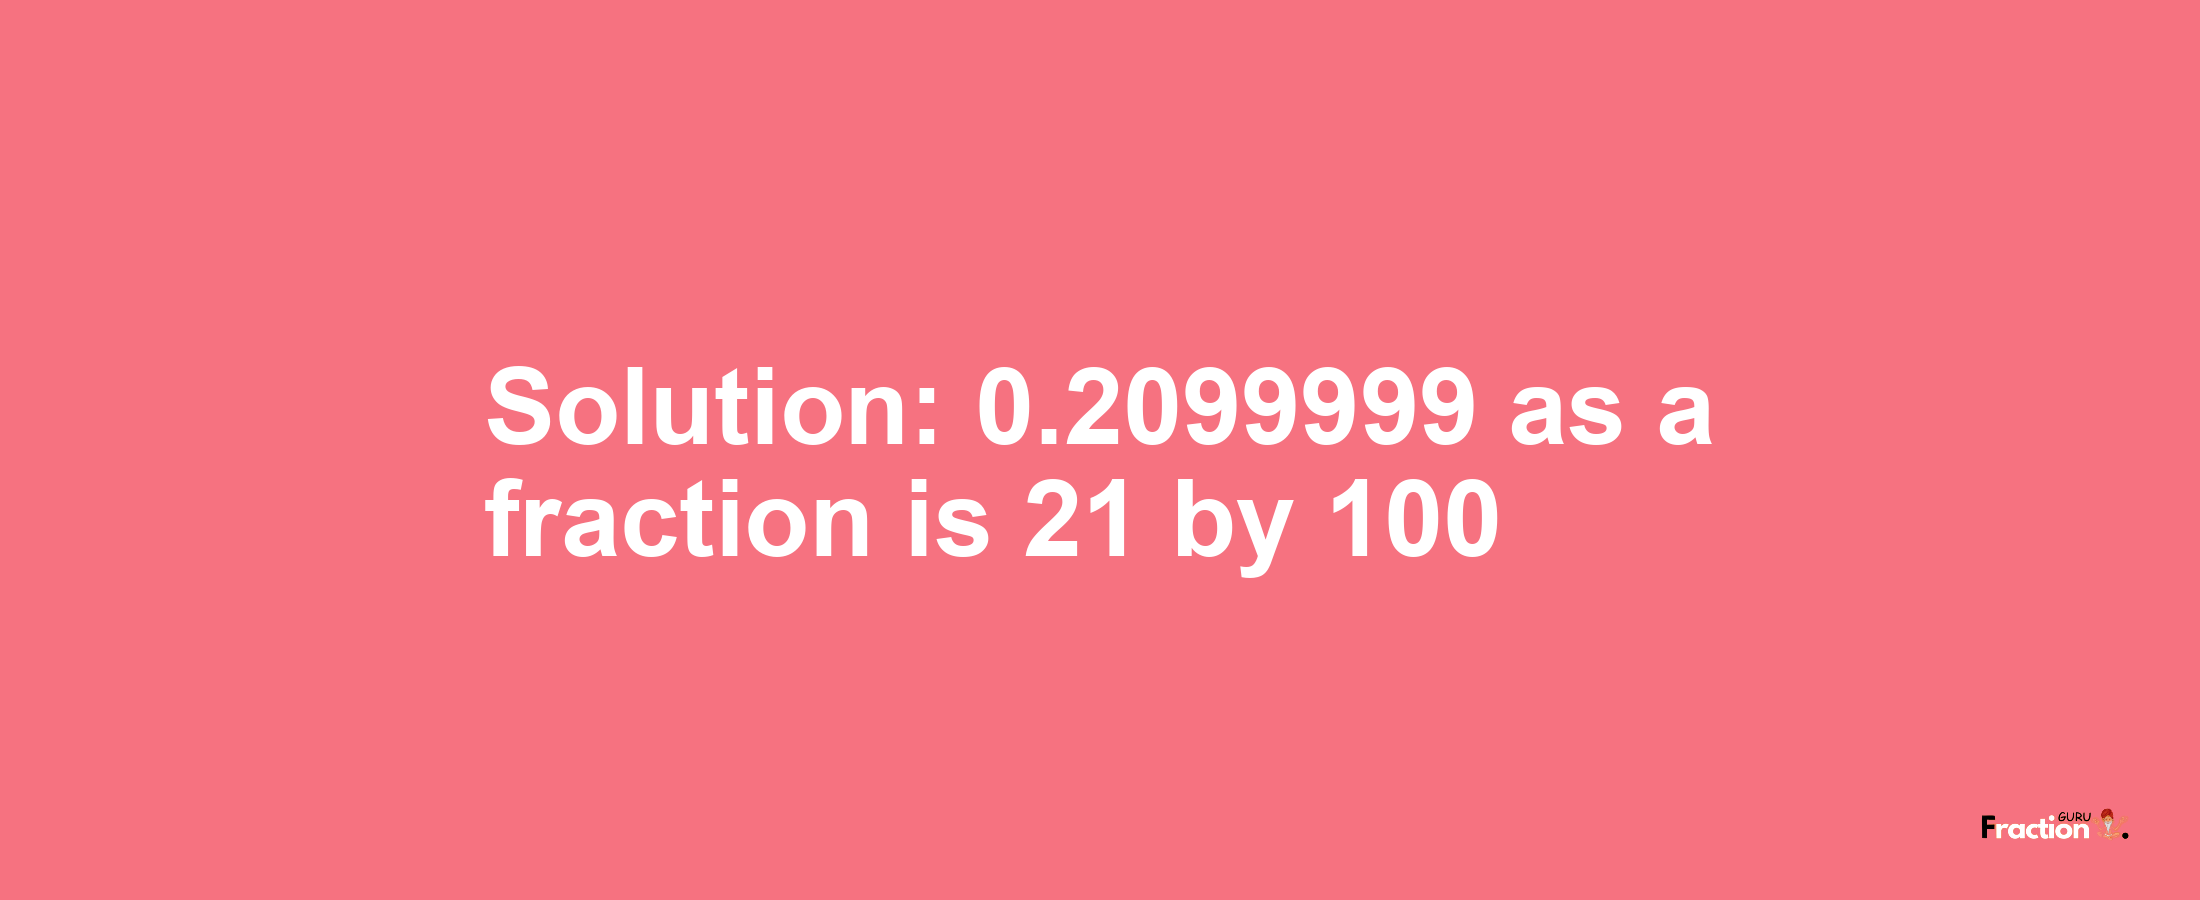 Solution:0.2099999 as a fraction is 21/100